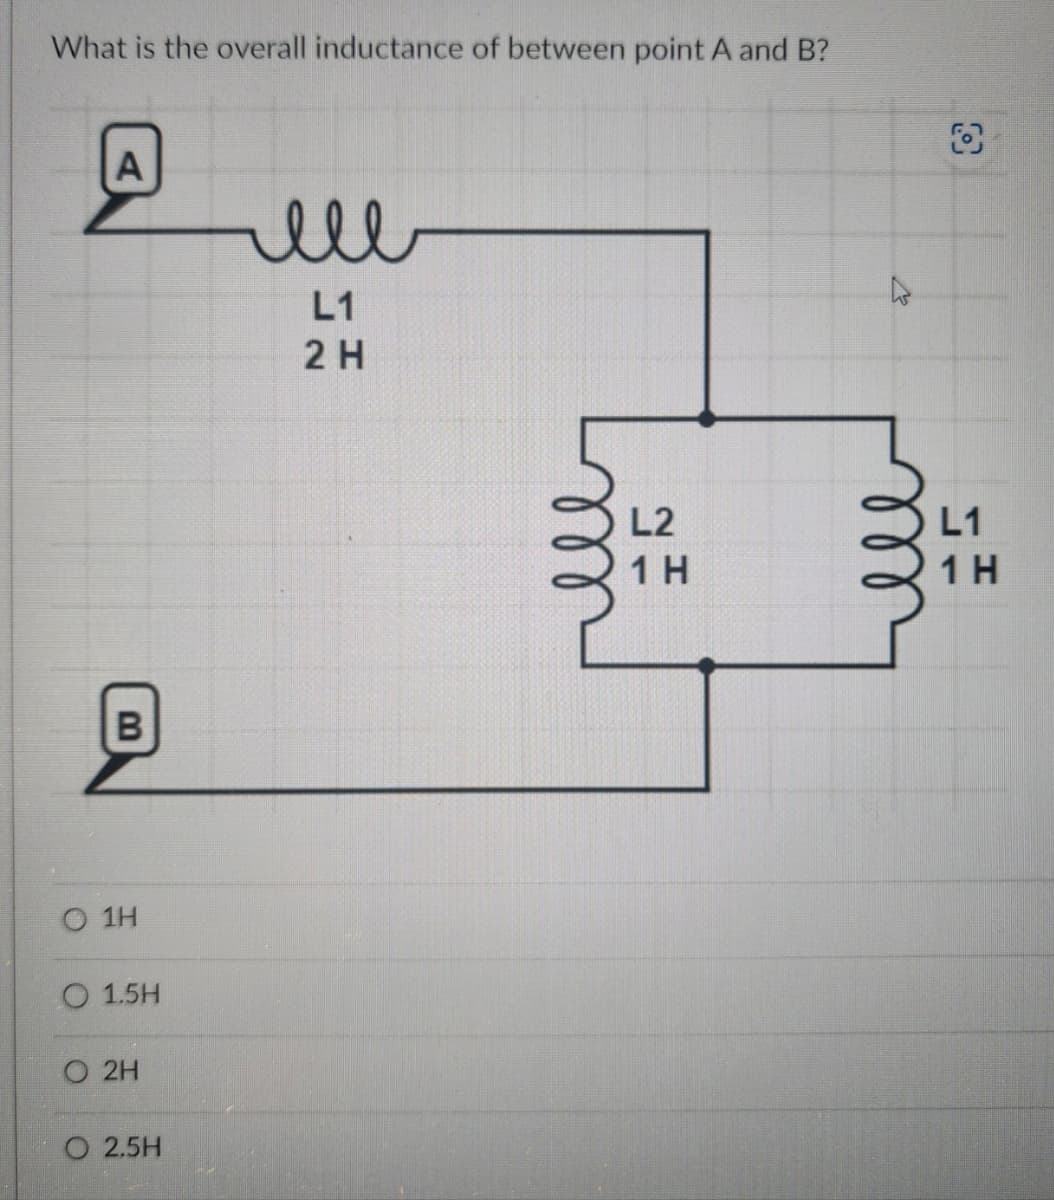 What is the overall inductance of between point A and B?
A
B
0 1
0 1.5
0 2
0 2.5H
ell
L1
2
لامه
L2
1 H
L1
1 H